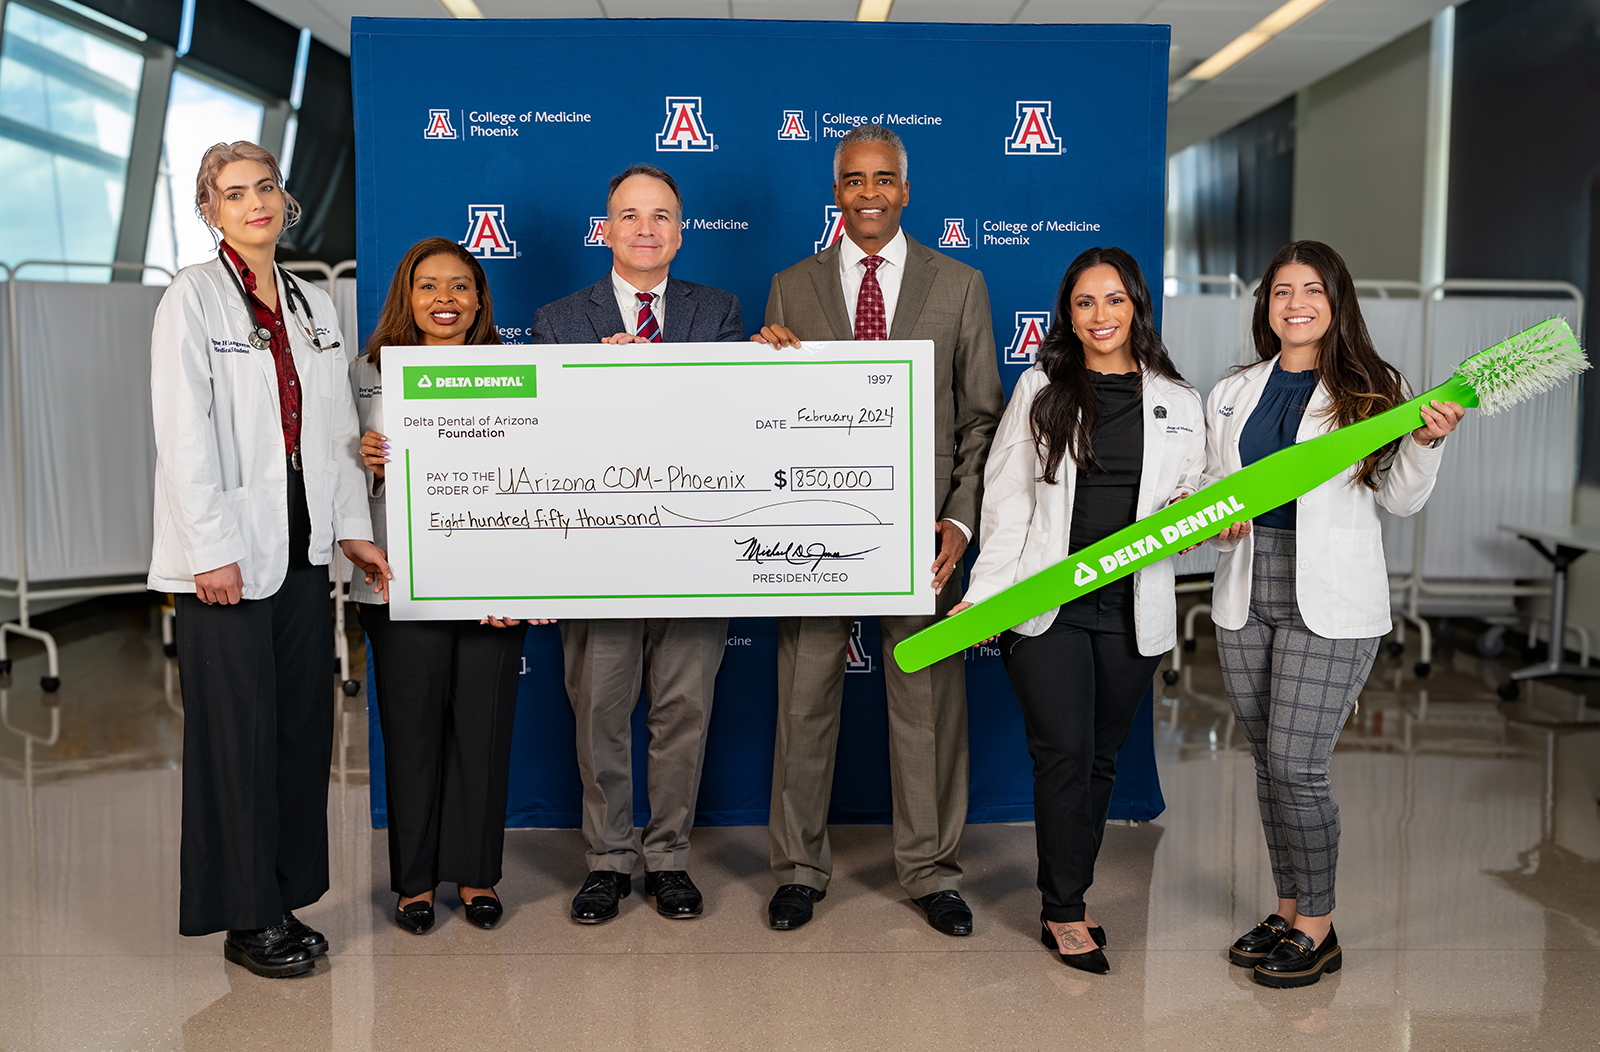  Fredric Wondisford, MD, dean of the college and Michael Jones, president and CEO of Delta Dental of Arizona, with medical students (from left to right) Sig Langsetmo, Bre'anca Sanders, Kambrea Soltero and Ariana Cano 